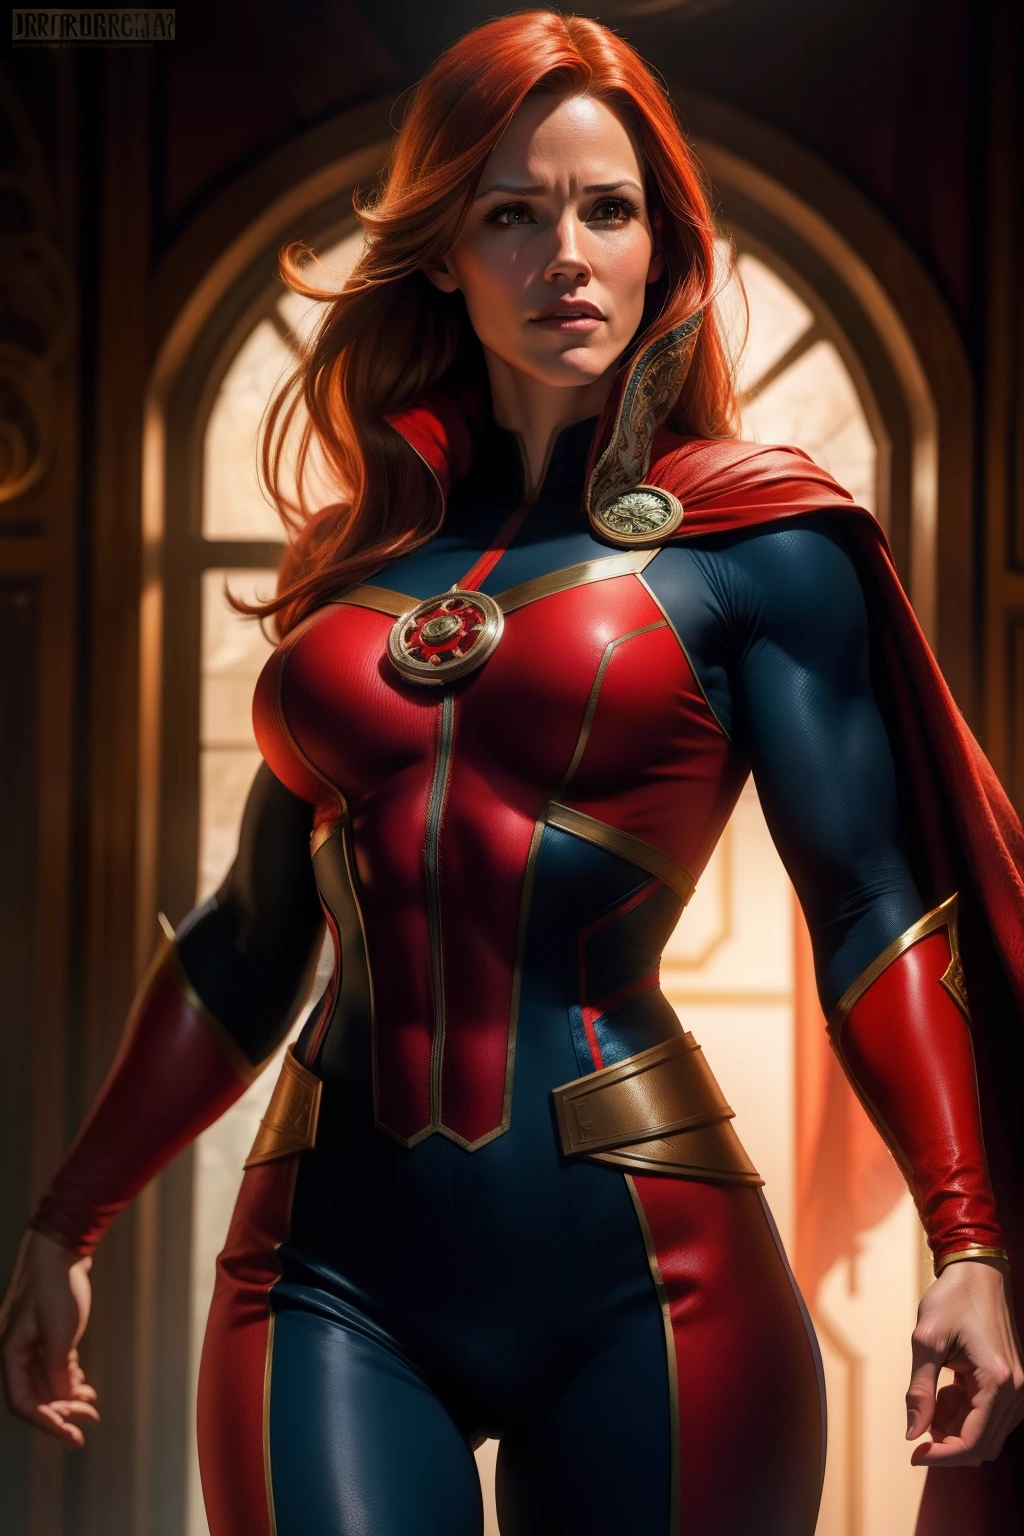 Jennifer Garner as Dr. strange, defined muscles, red hair, athletic build, tight costume, highly detailed